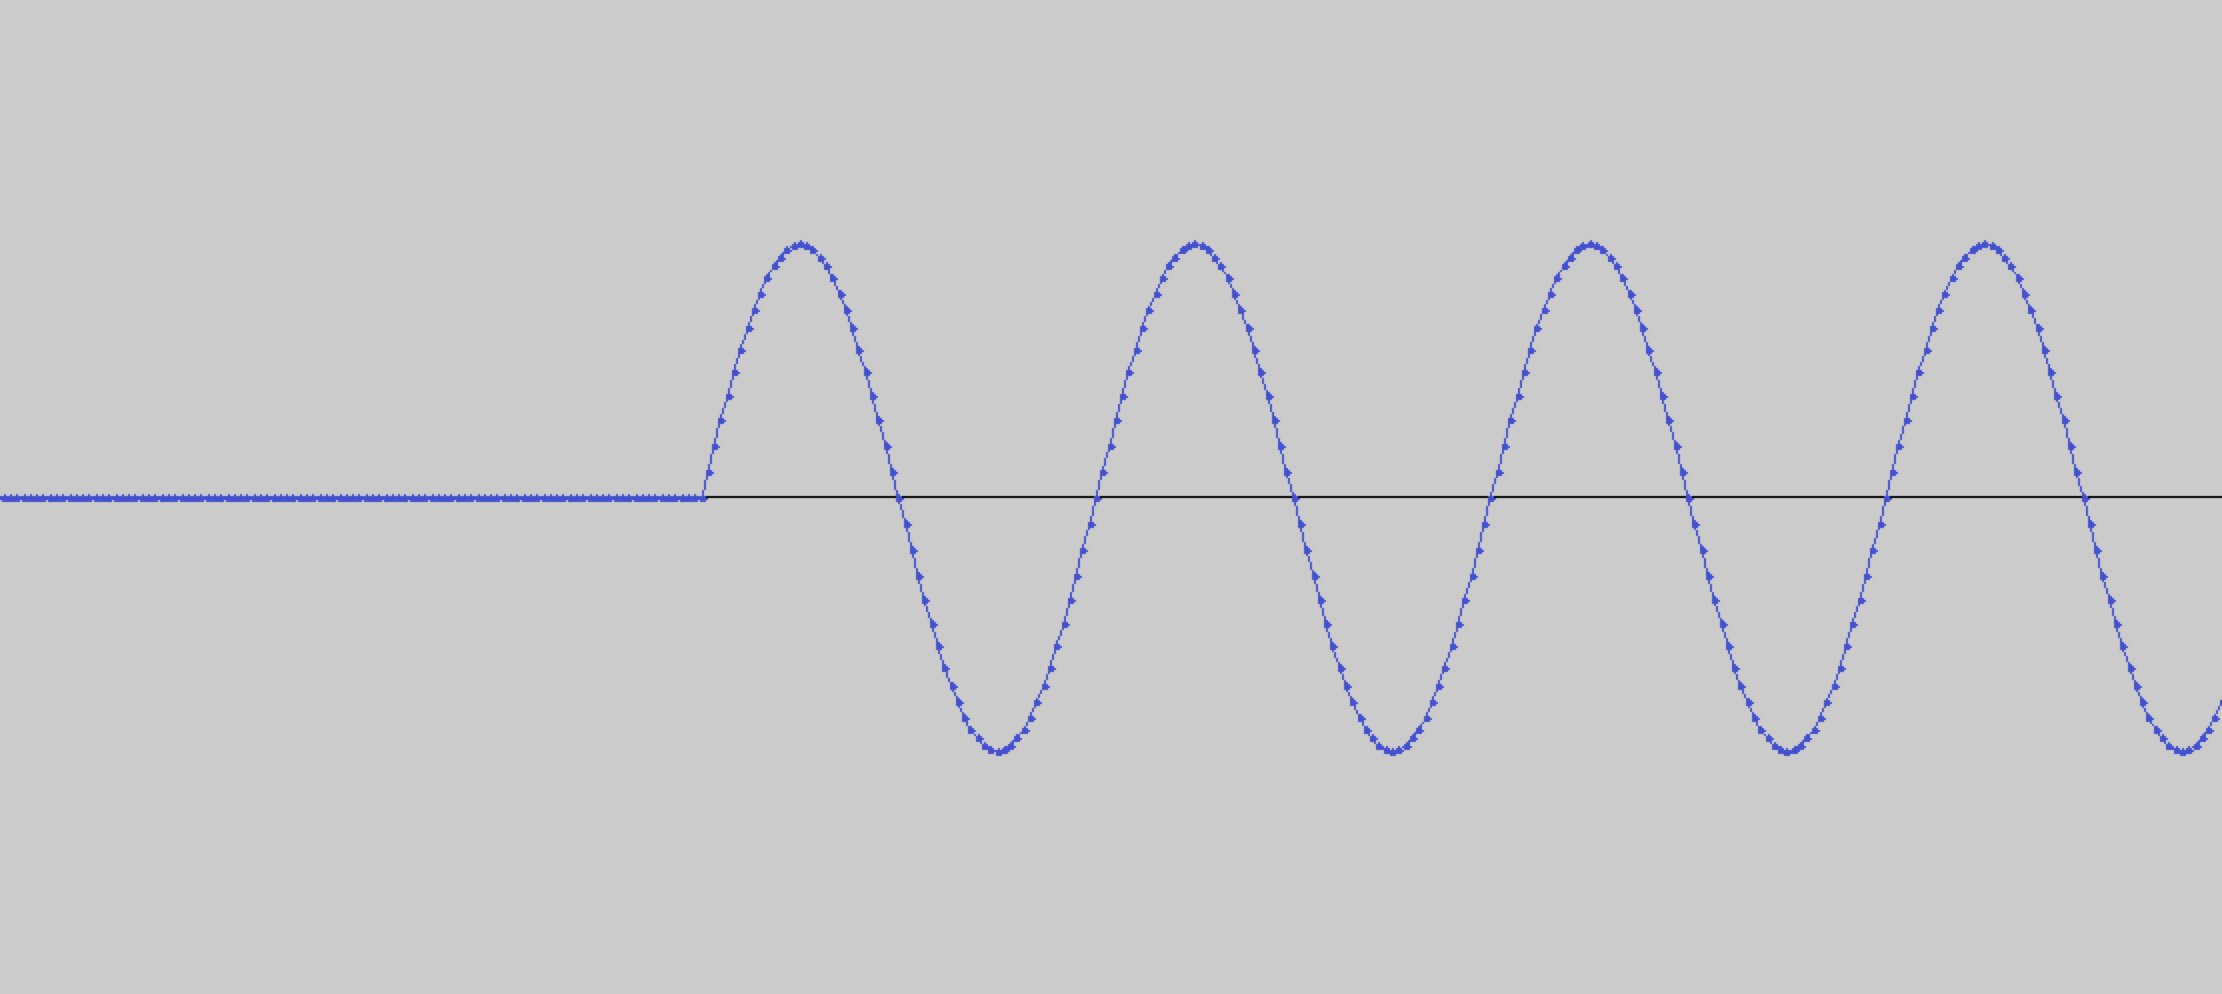 Figure 1: Sinusoidal wave with abrupt start